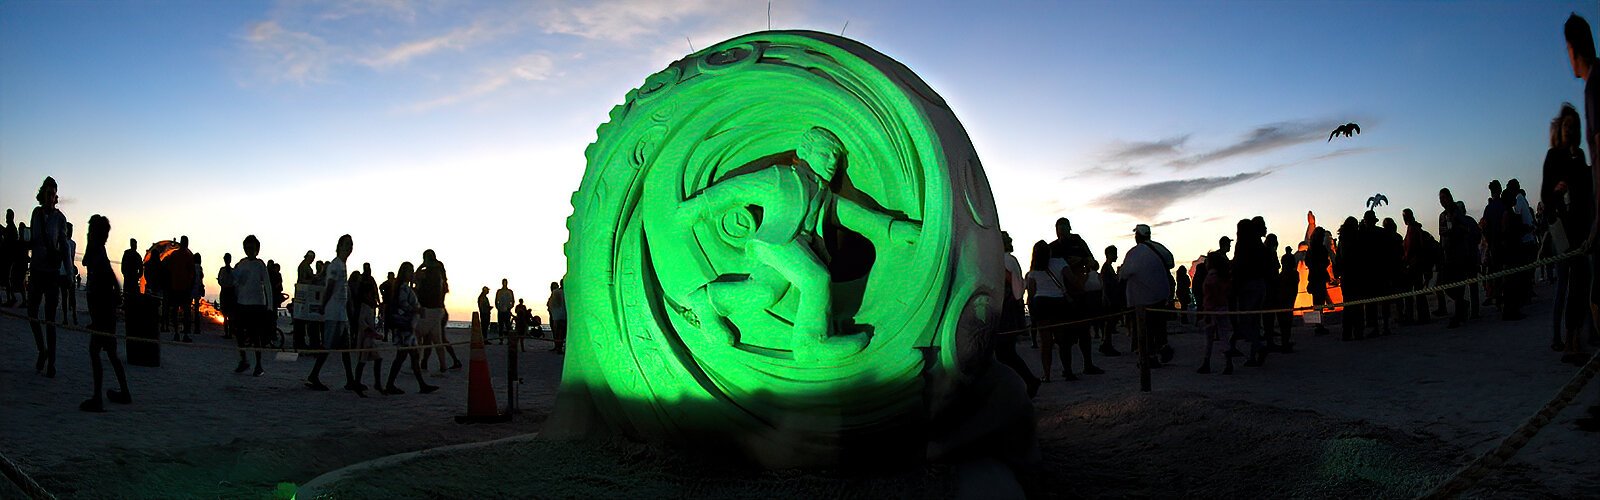 Illuminated by green flood lights, “Time Warp” by Benoit Dutherage of France was part of the recent Sanding Ovations sand sculpture exhibit on Treasure Island.